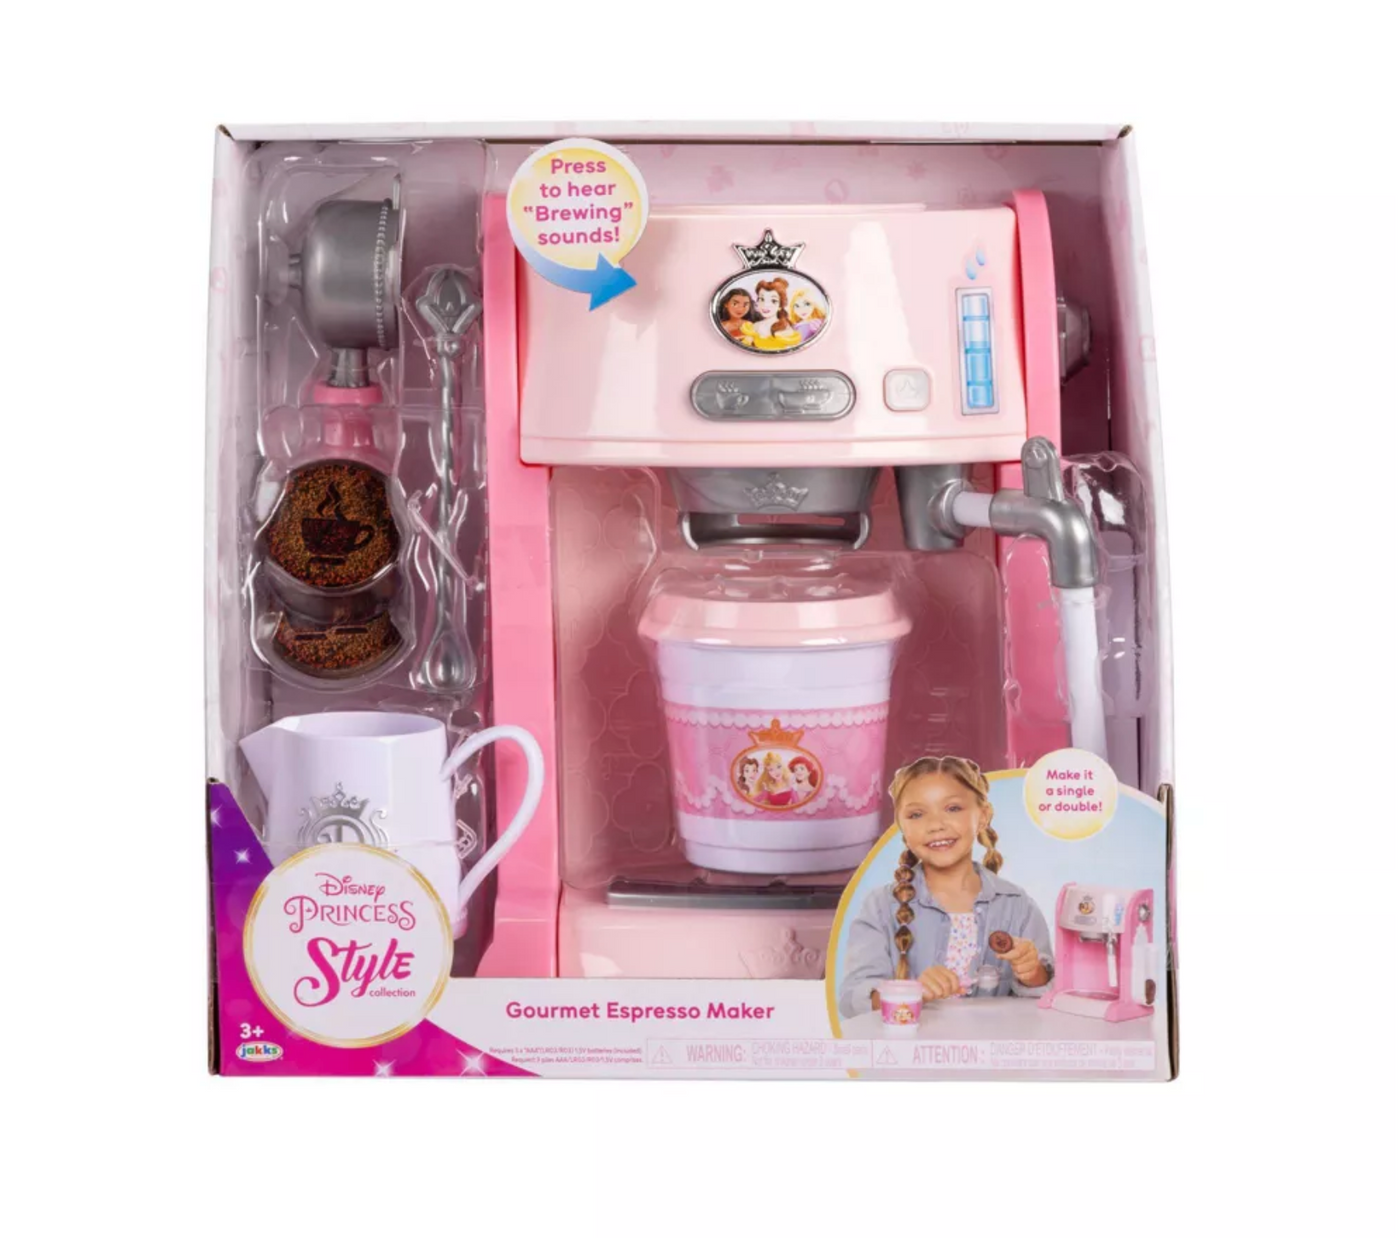 Disney Princess Style Collection Espresso Coffee Maker Toy New with Box